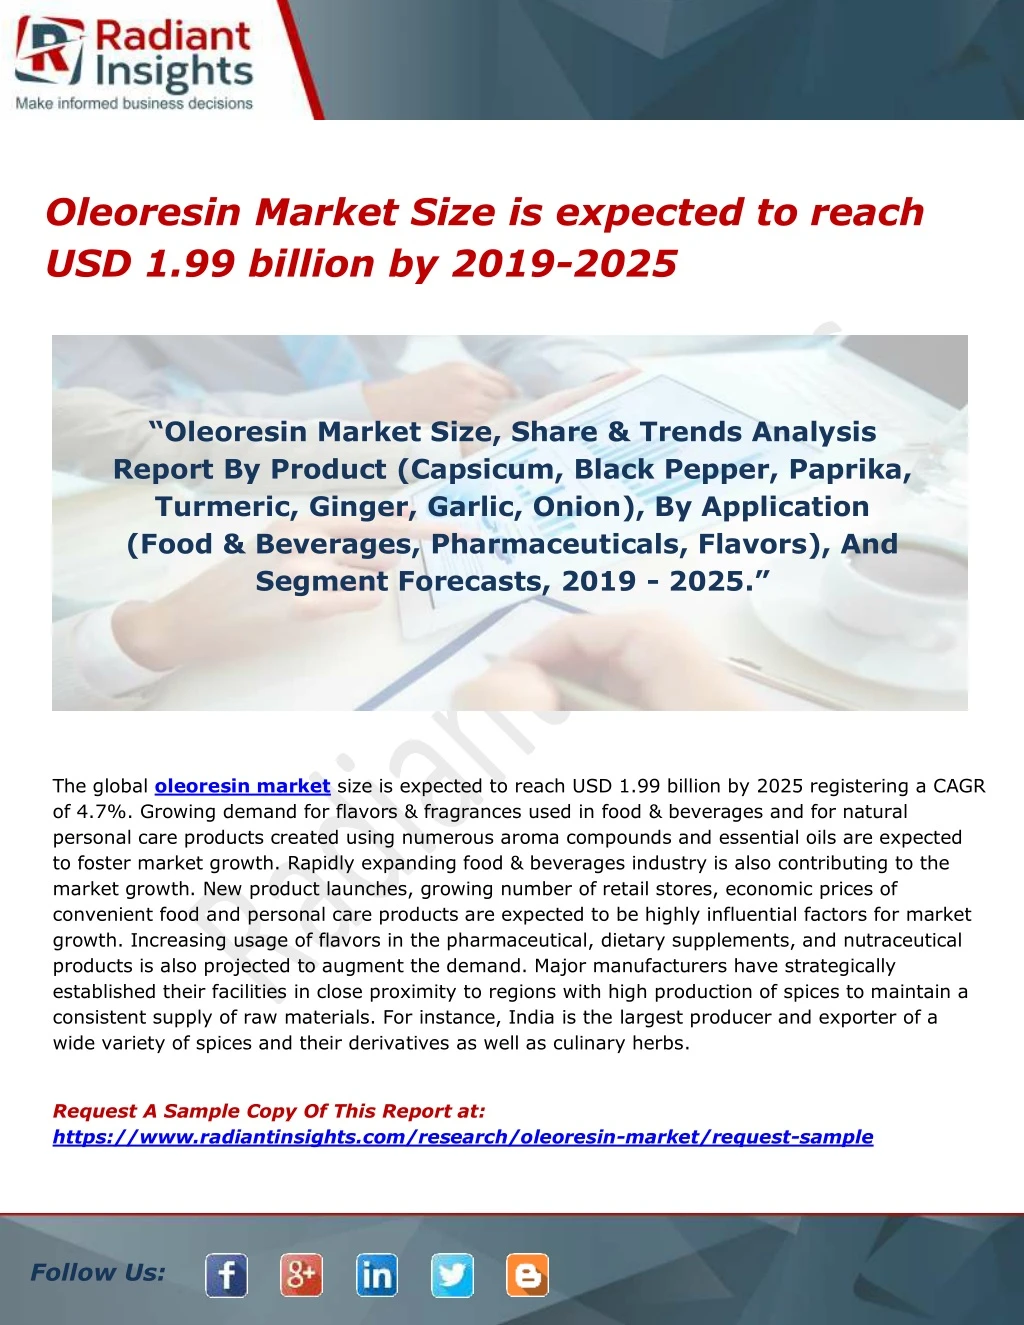 oleoresin market size is expected to reach